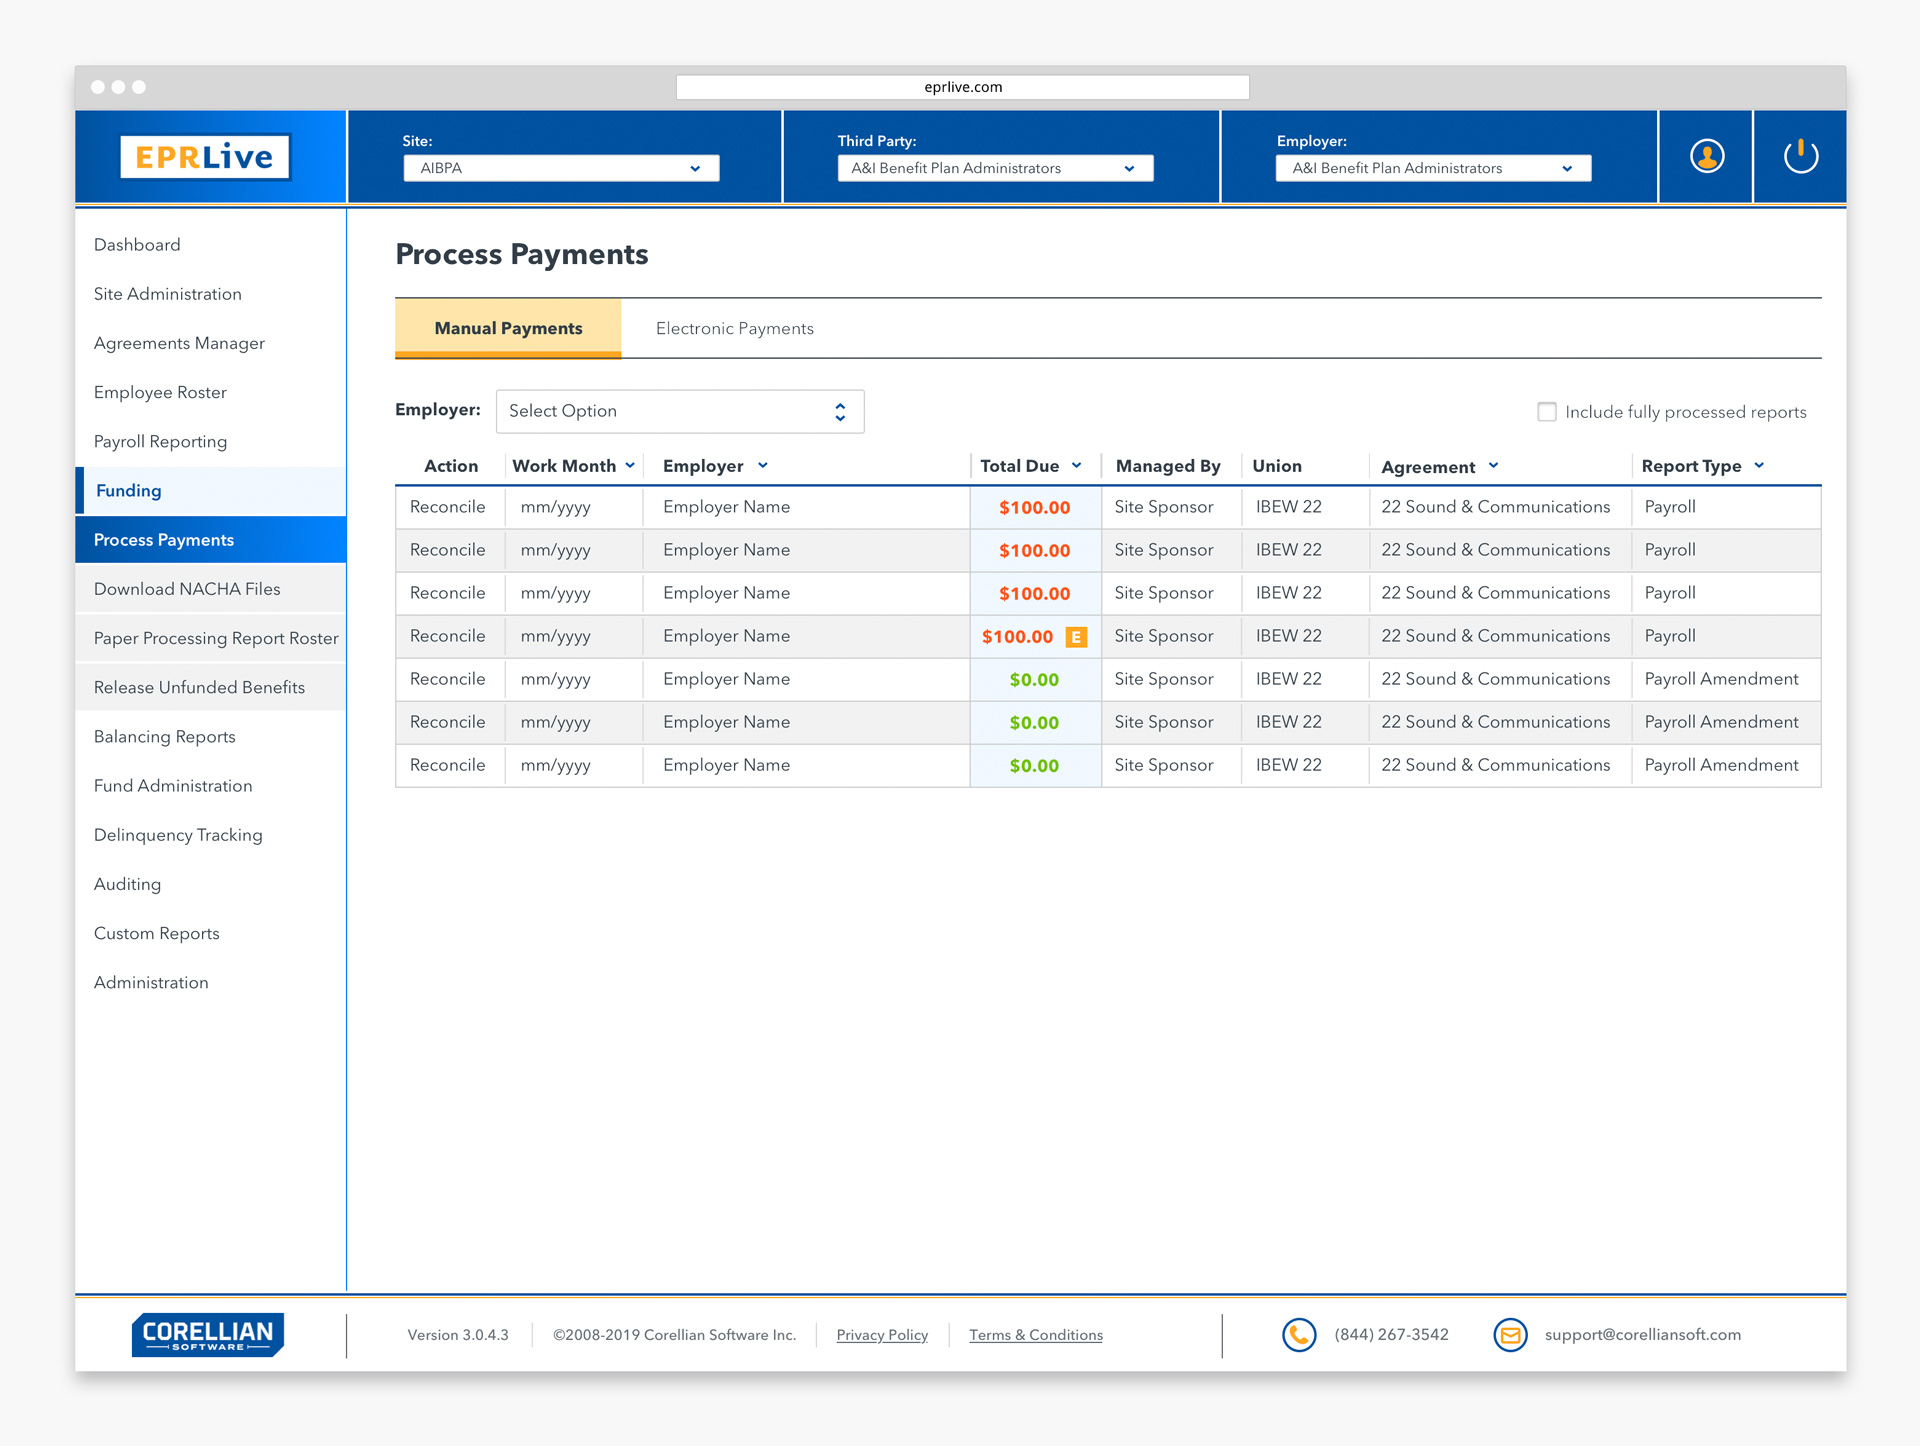 Process payments page for EPRLive web application